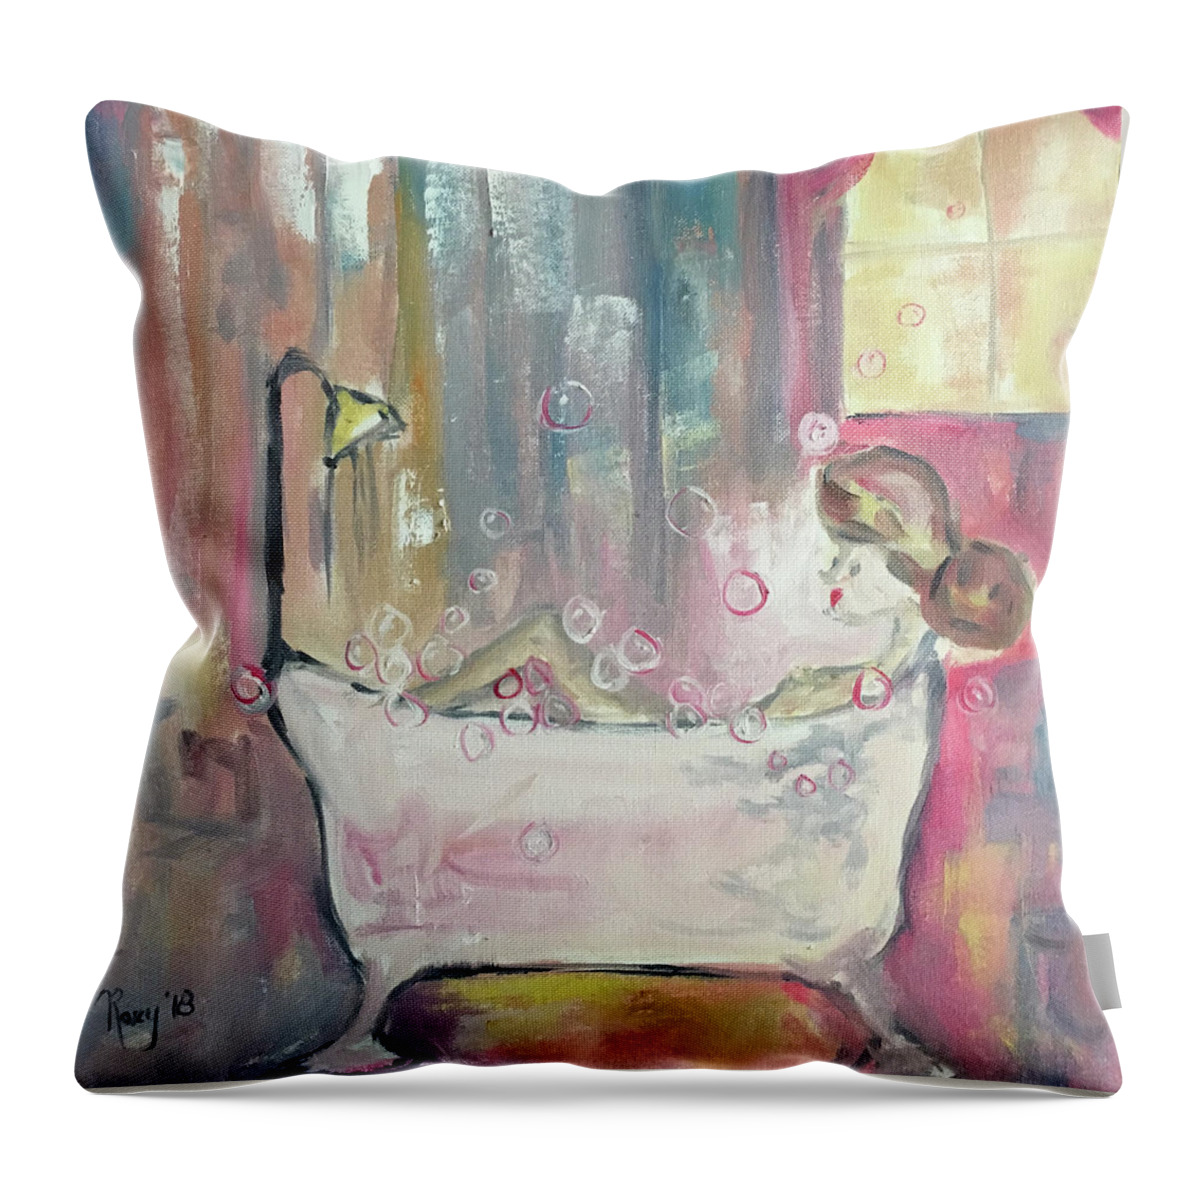 Bubble Bath Throw Pillow featuring the painting Bubble Bath by Roxy Rich